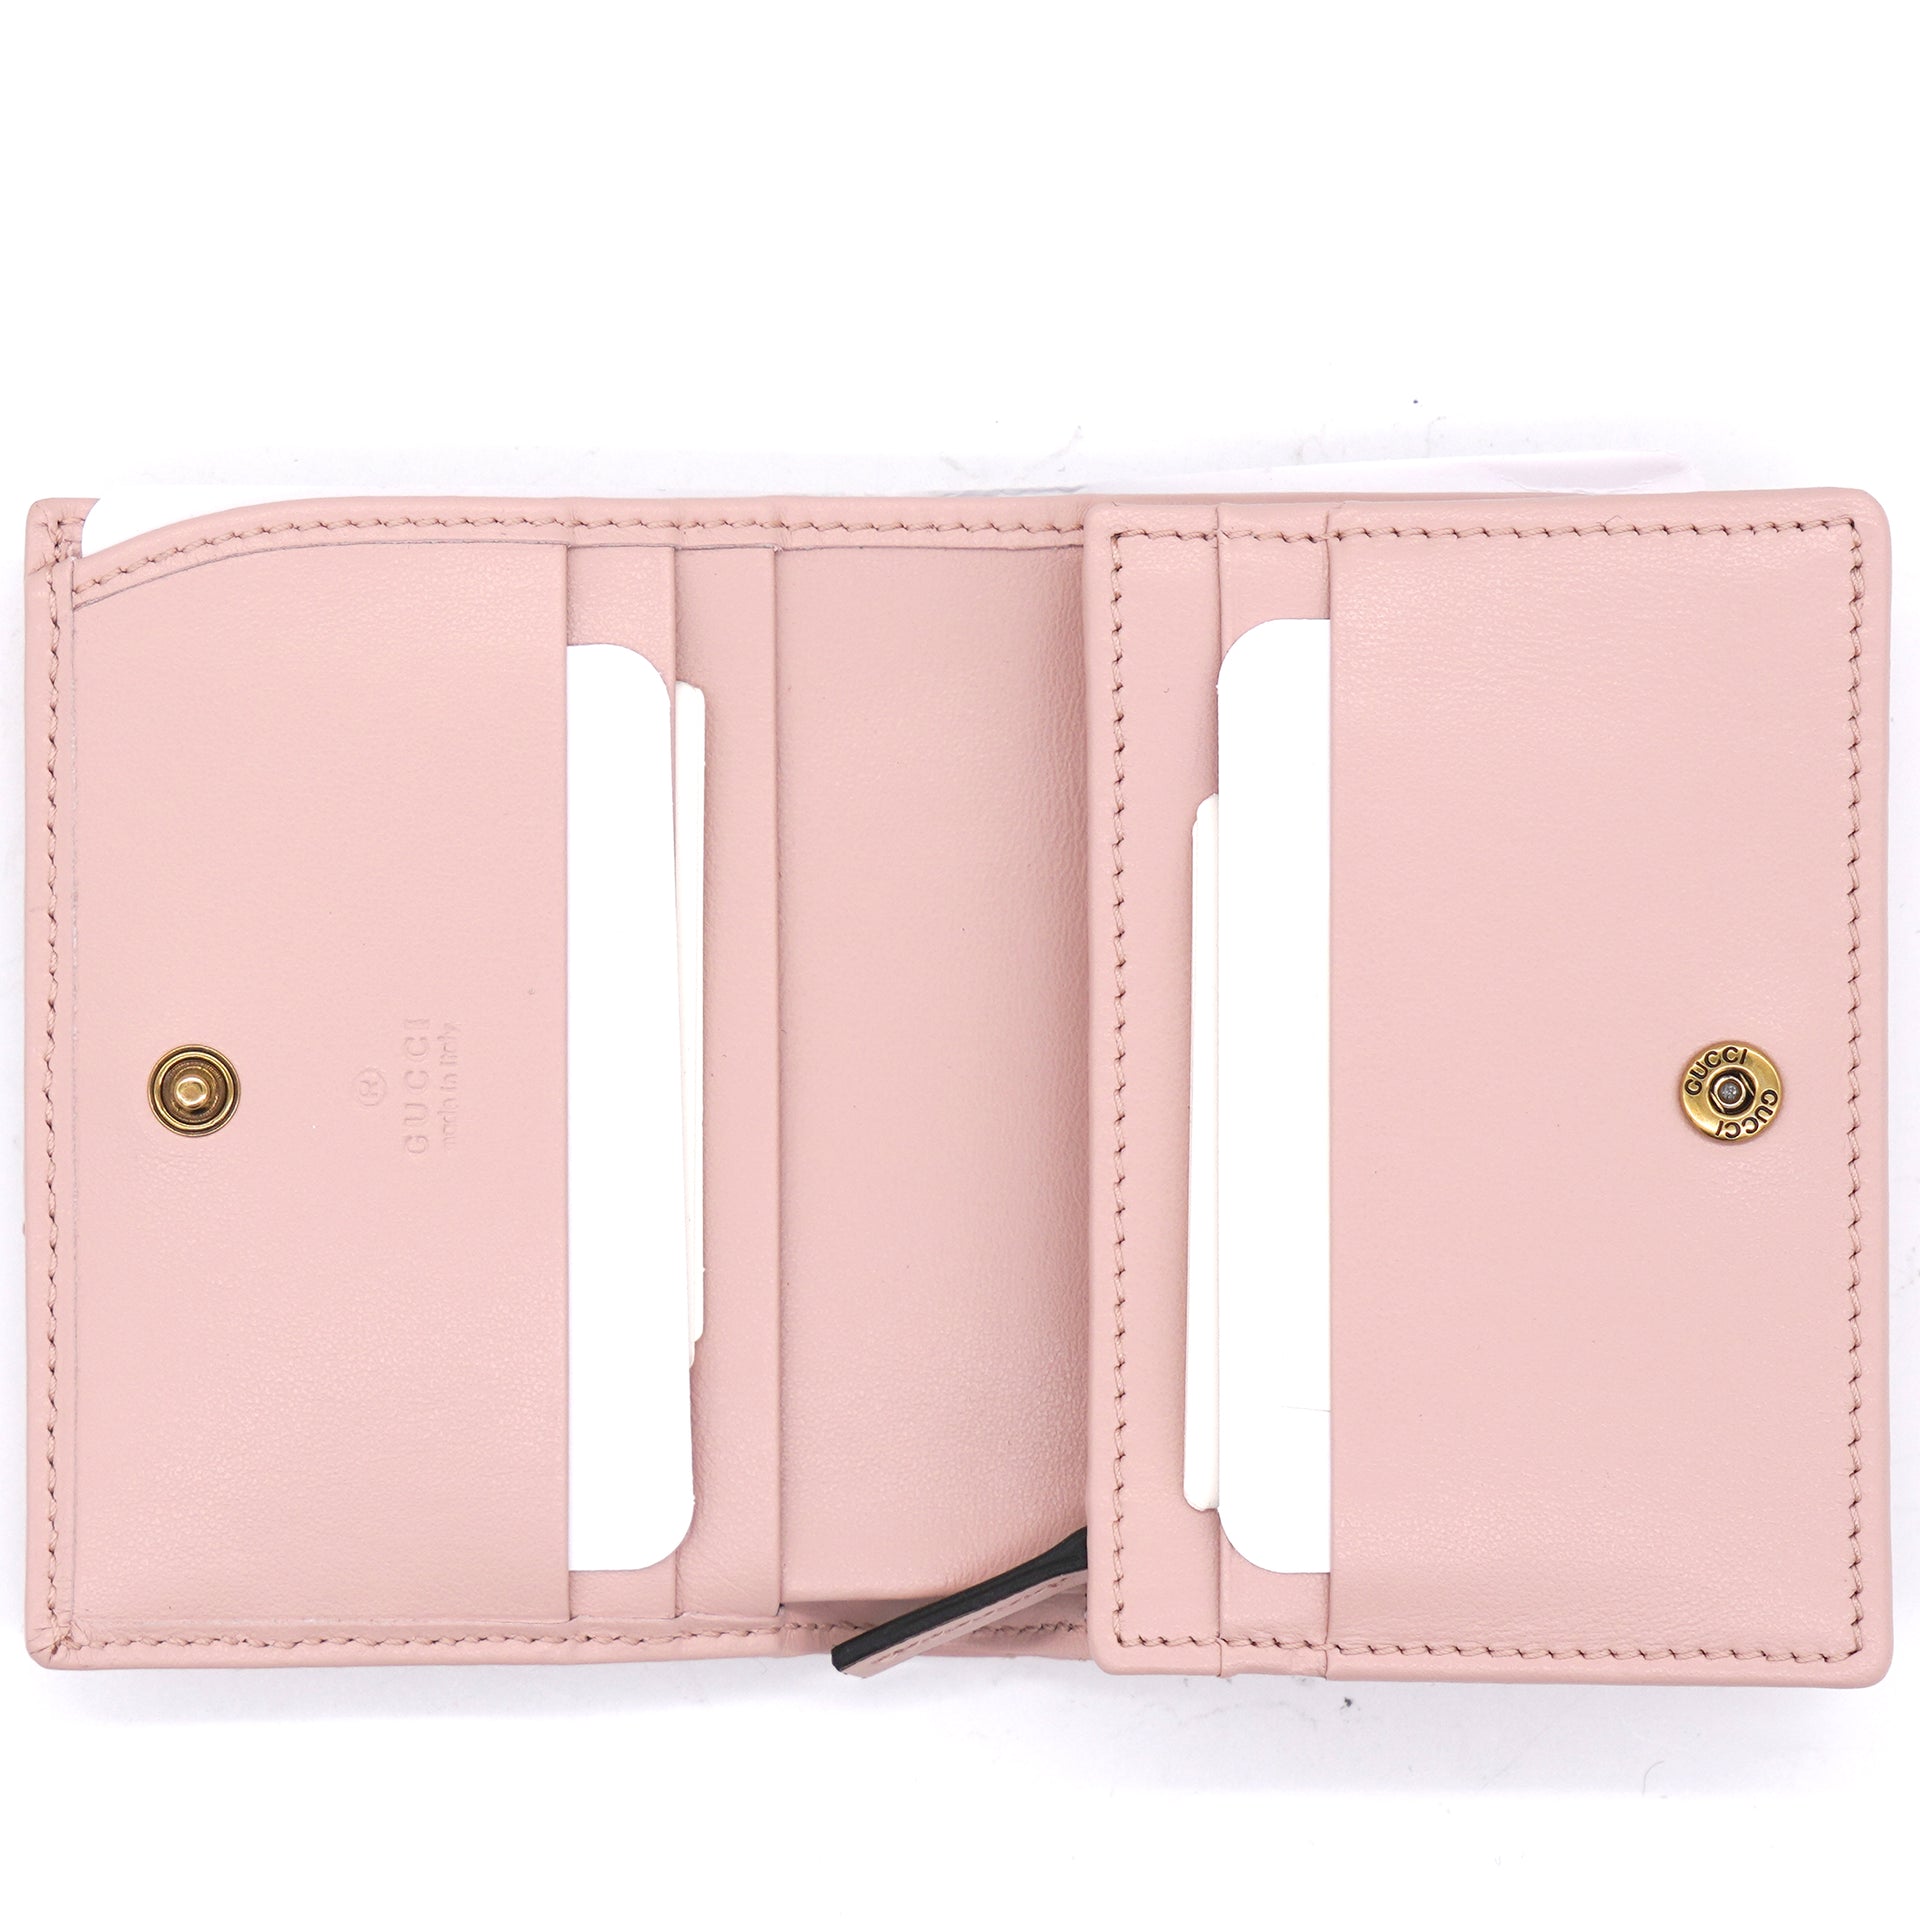 Pink Matelasse Leather GG Marmont Card Case